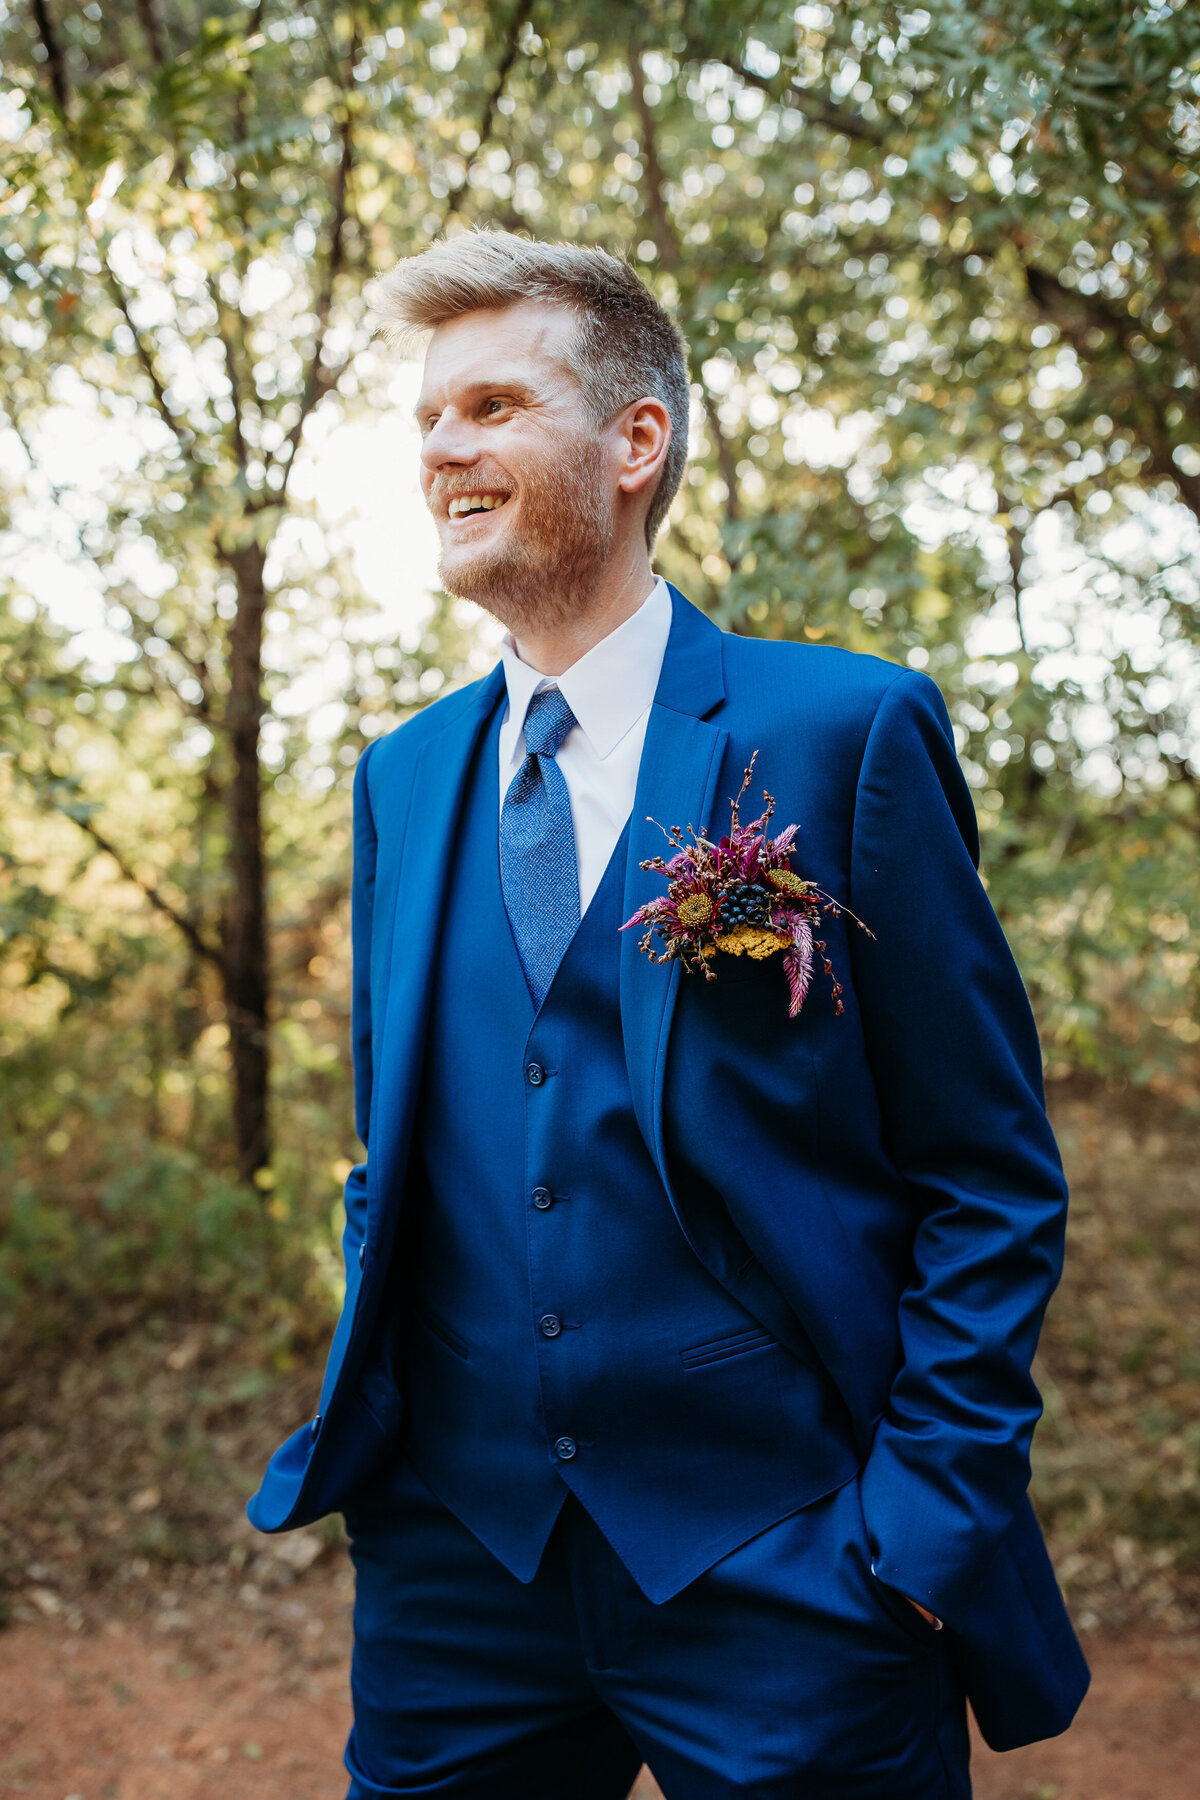 Groom in a bright blue suit smiling confidently in a forest setting, with a colorful boutonniere